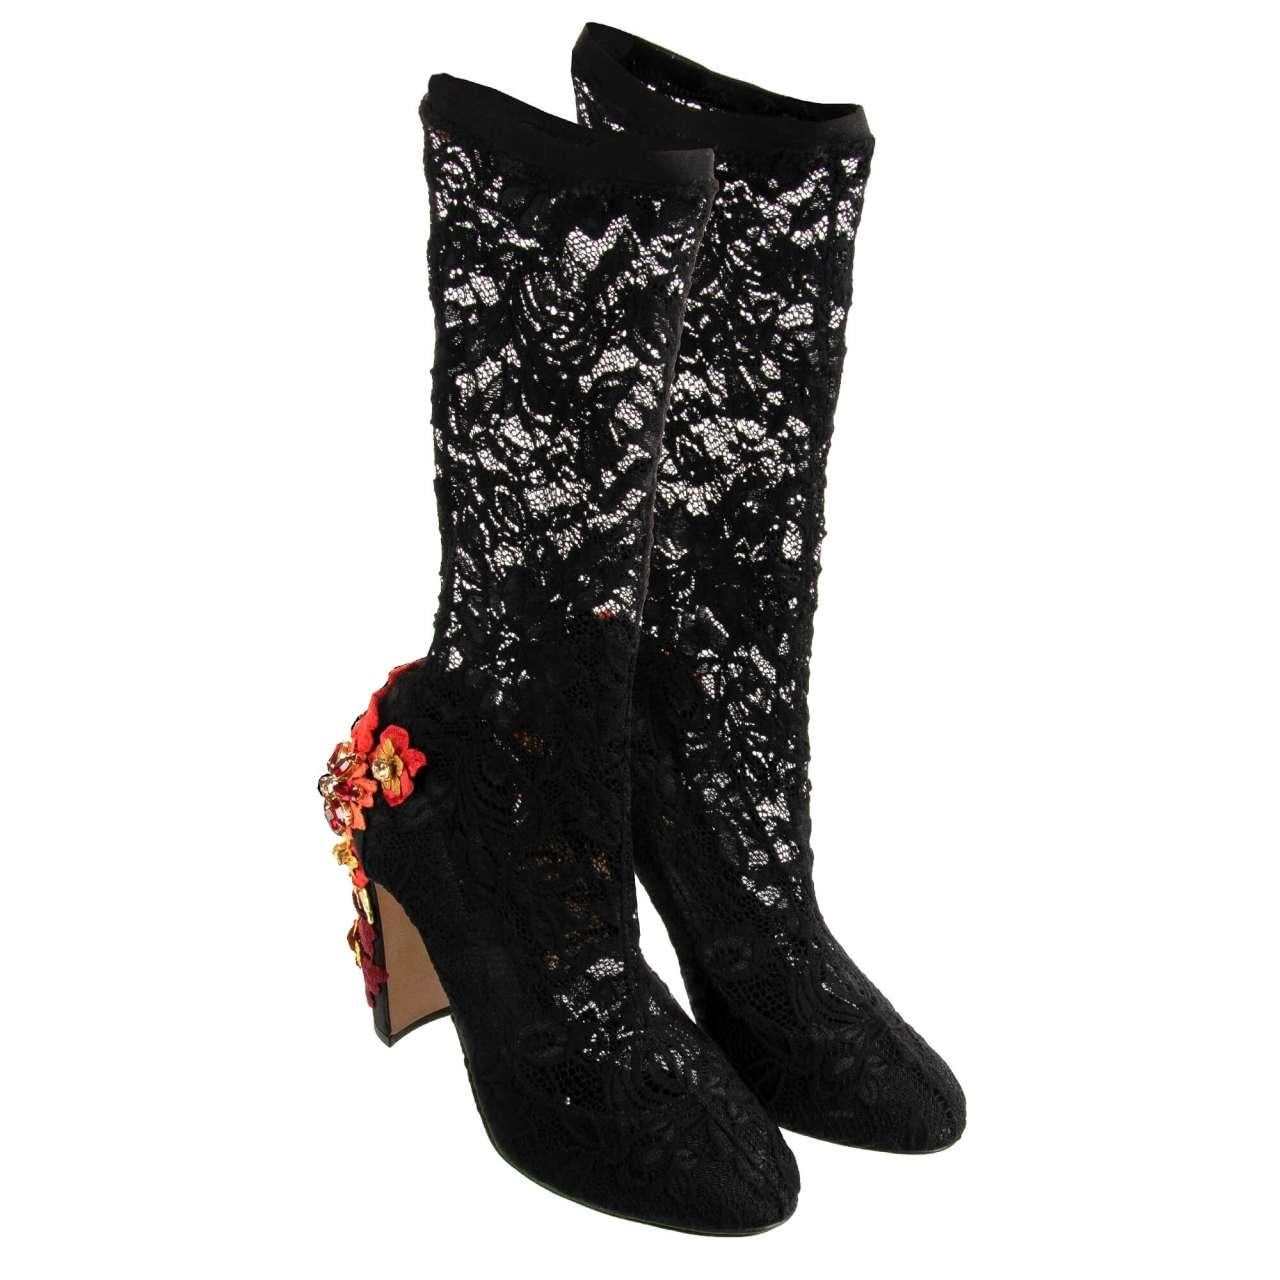 Dolce & Gabbana Crystal Flower Rose Lace Boots Pumps VALLY Black 40 10 For Sale 1